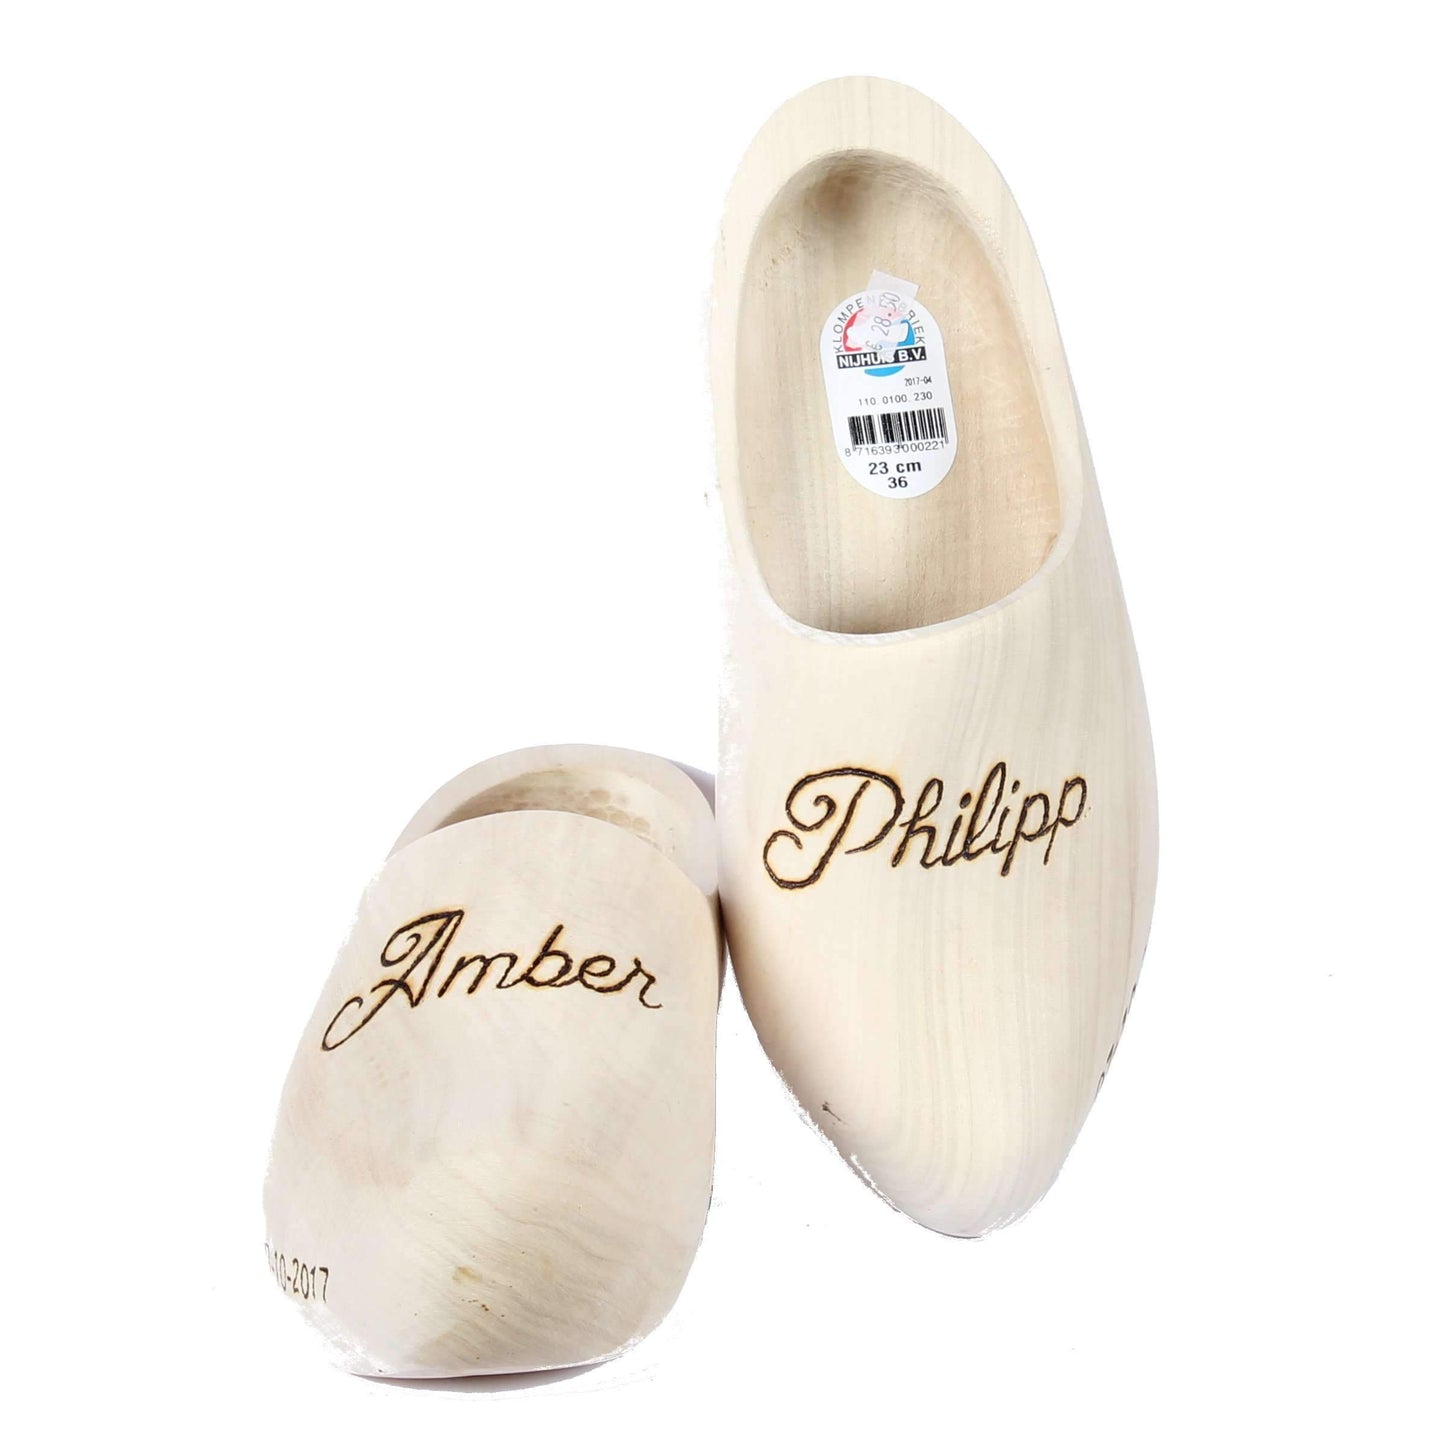 Engraved Wooden Shoes, Get your name on your Clogs